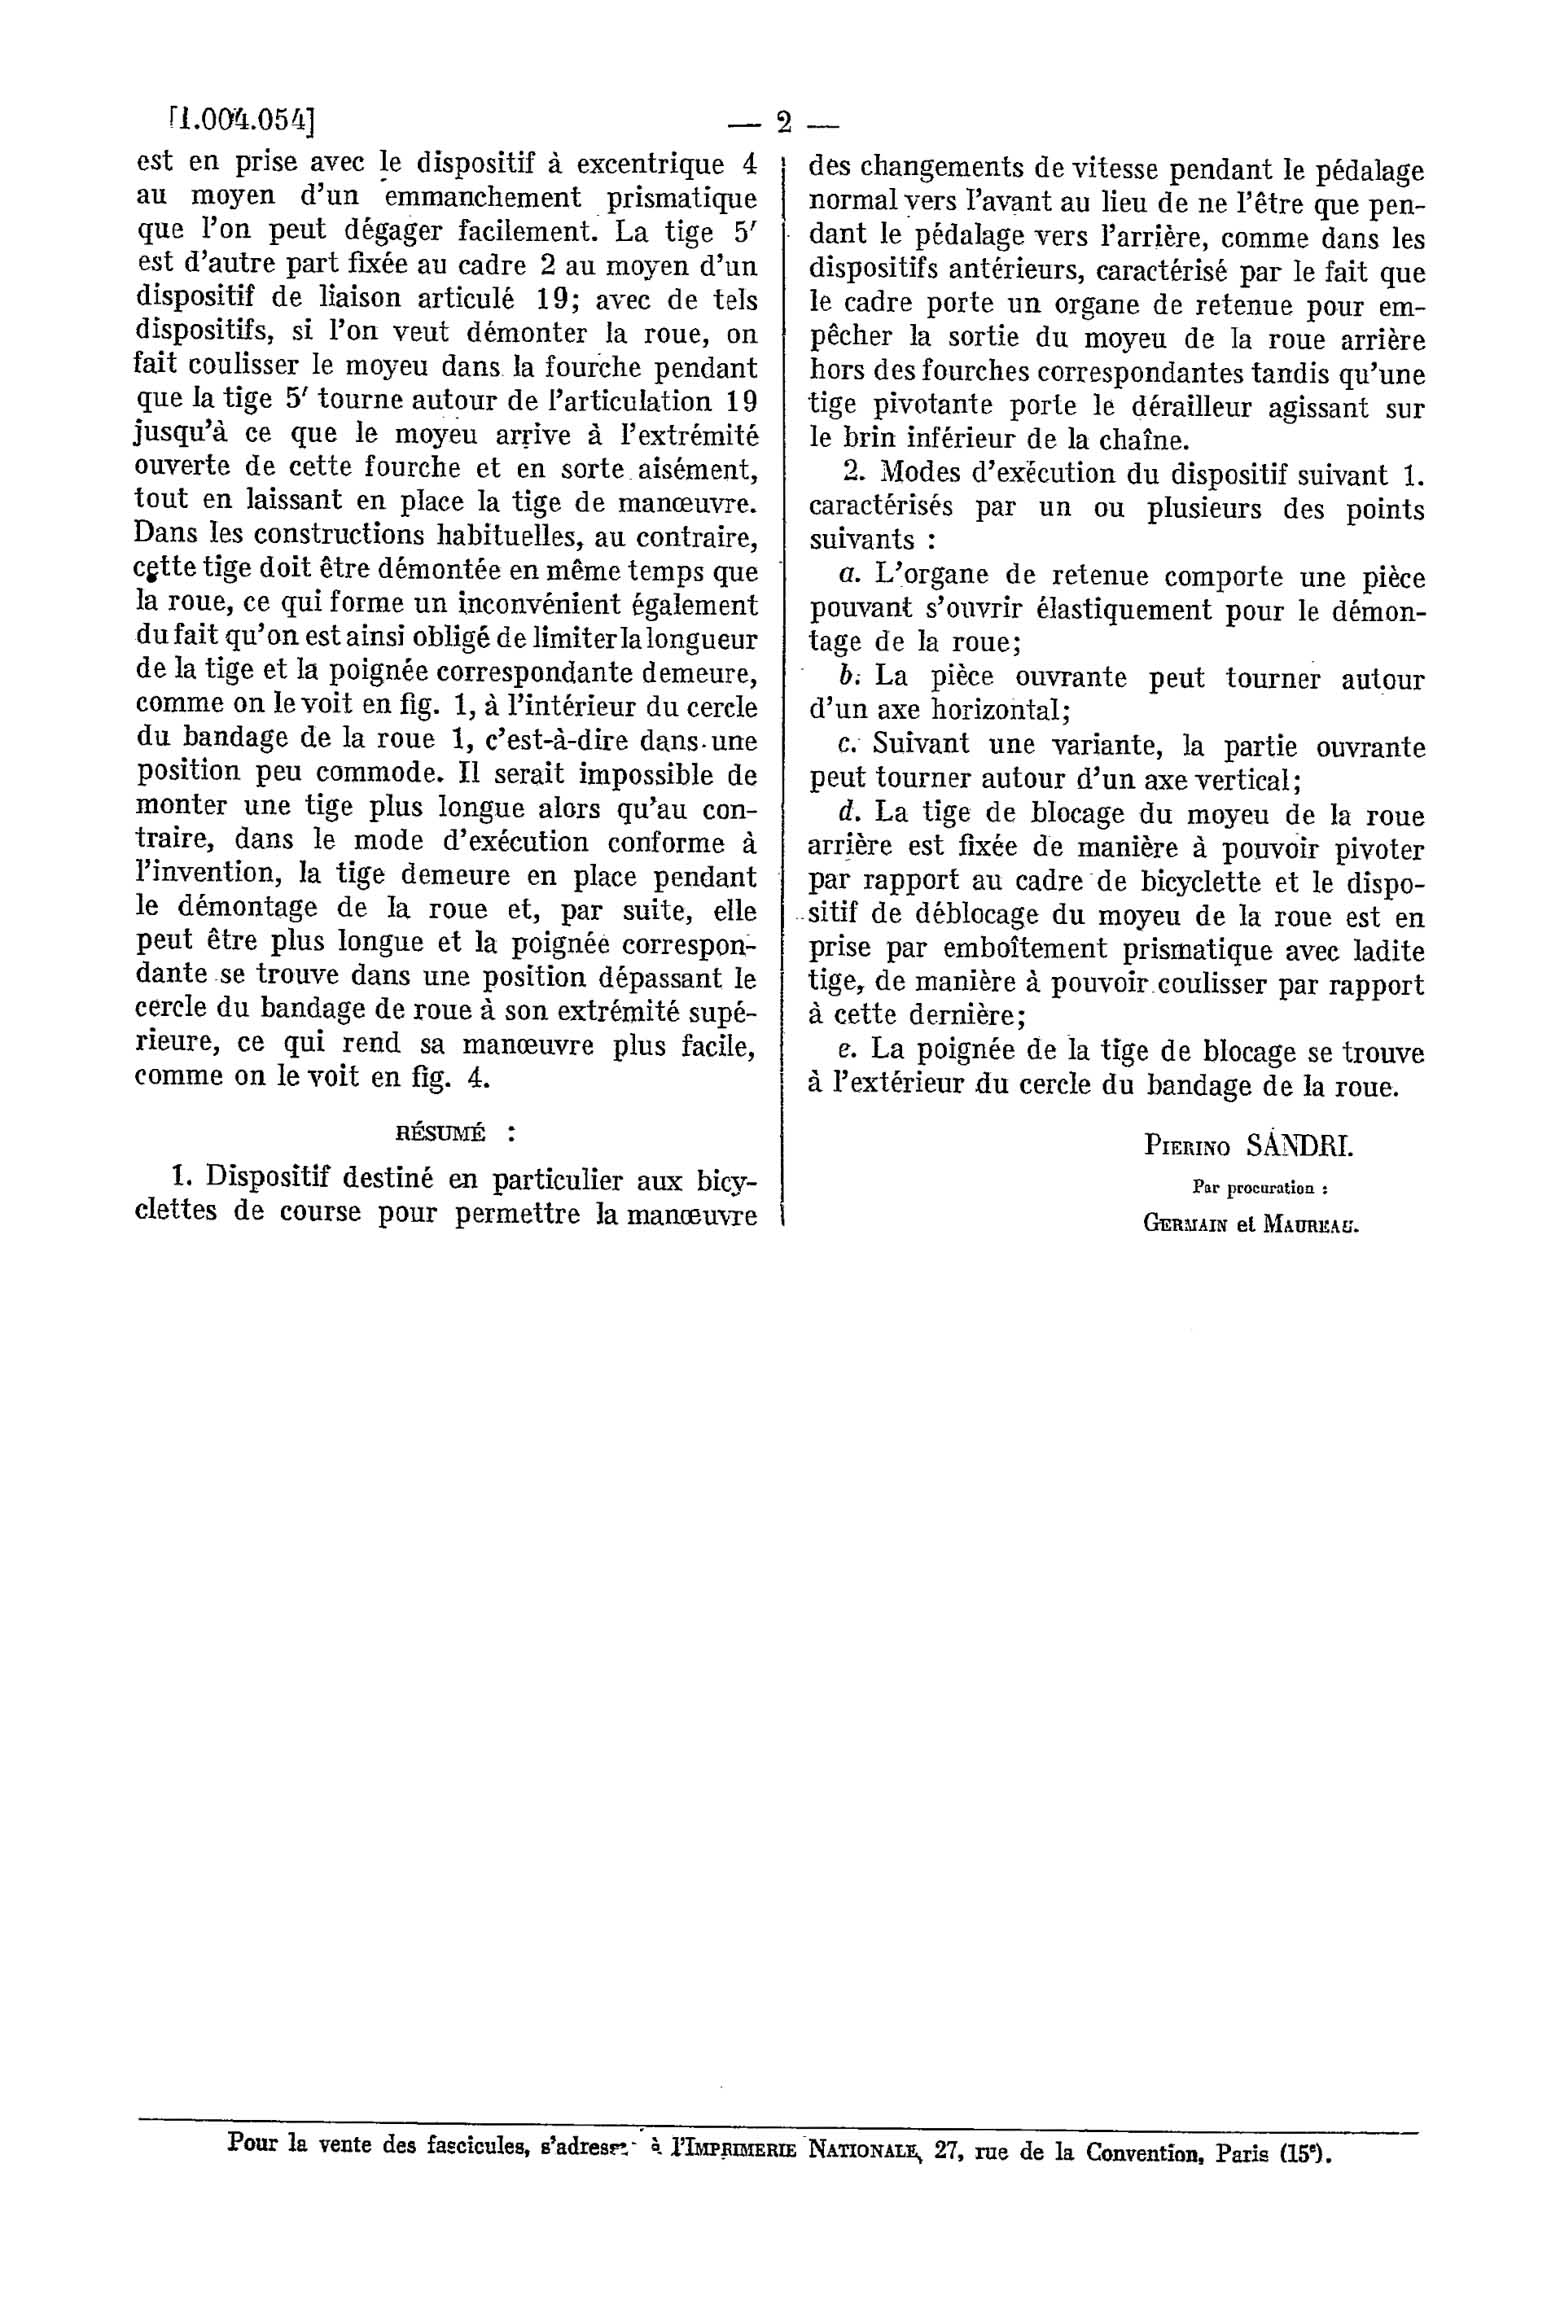 French Patent 1,004,054 - Monviso scan 02 main image